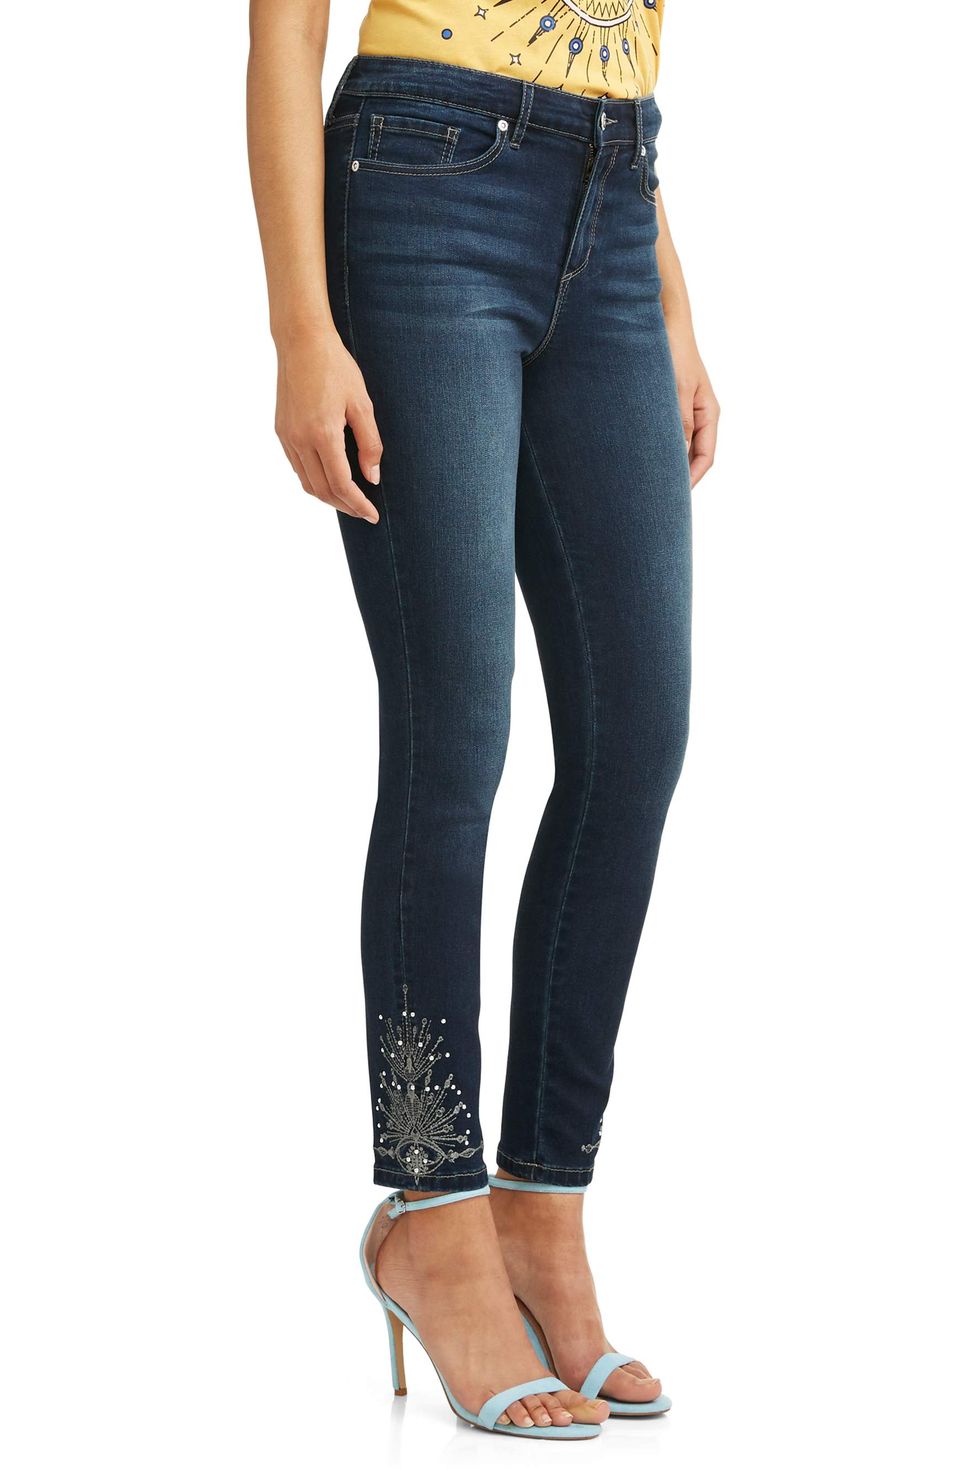 Sofía Jeans by Sofía Vergara﻿﻿ at Walmart Are Size-Inclusive and Super  Affordable